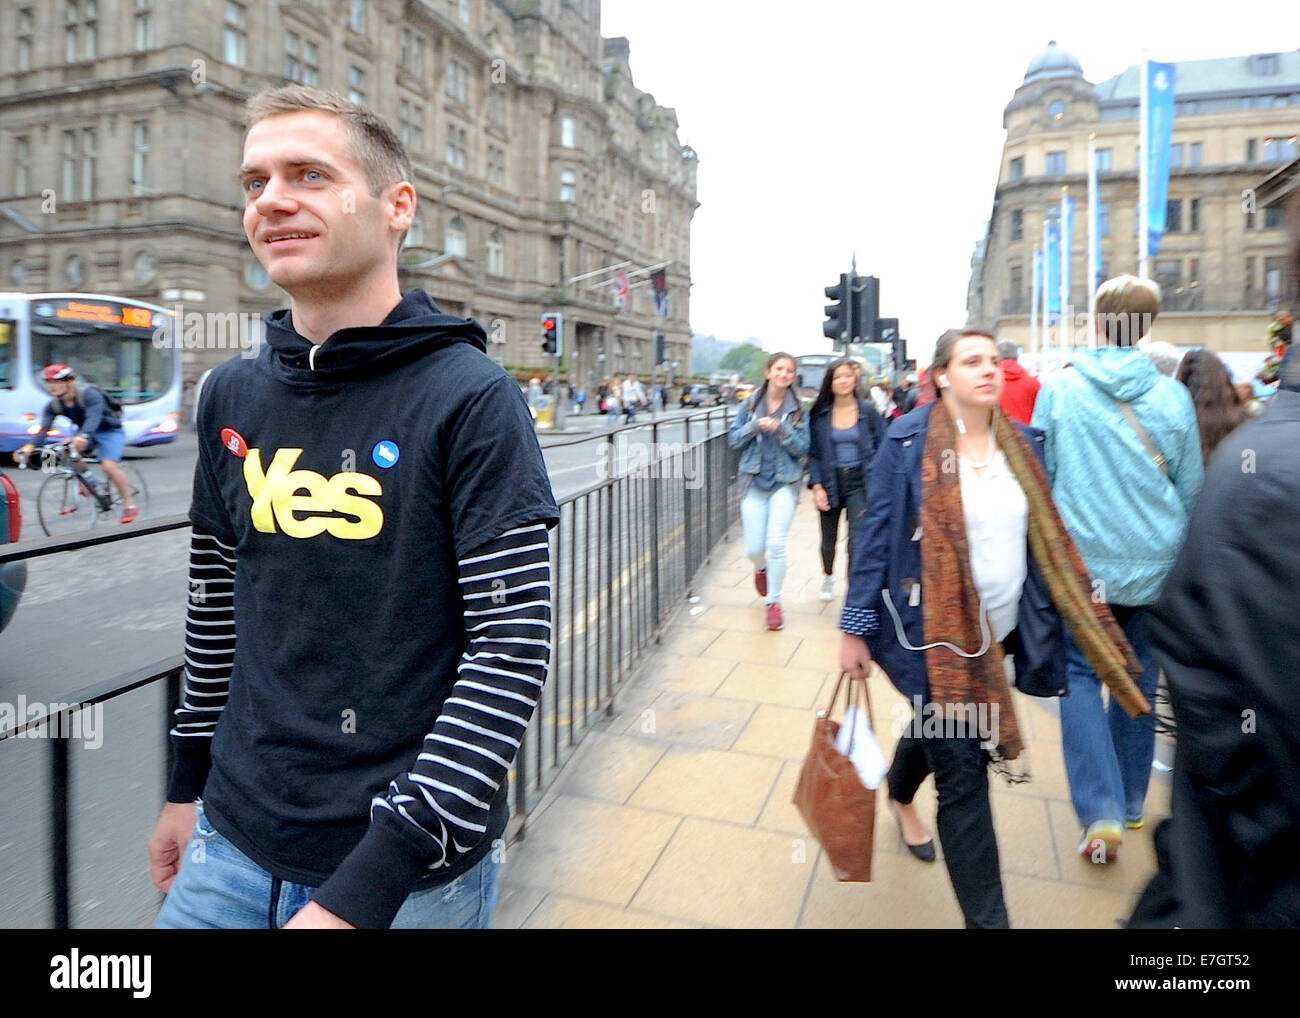 Edinburgh, United KIngdom. 17th Sep, 2014. Supporters for the ''YES'' vote were out pushing their vote for the undecided vote around Edinburgh.The group say this is one last push to reach undecided voters for the Scottish referendum vote. Credit:  Gail Orenstein/ZUMA Wire/Alamy Live News Stock Photo